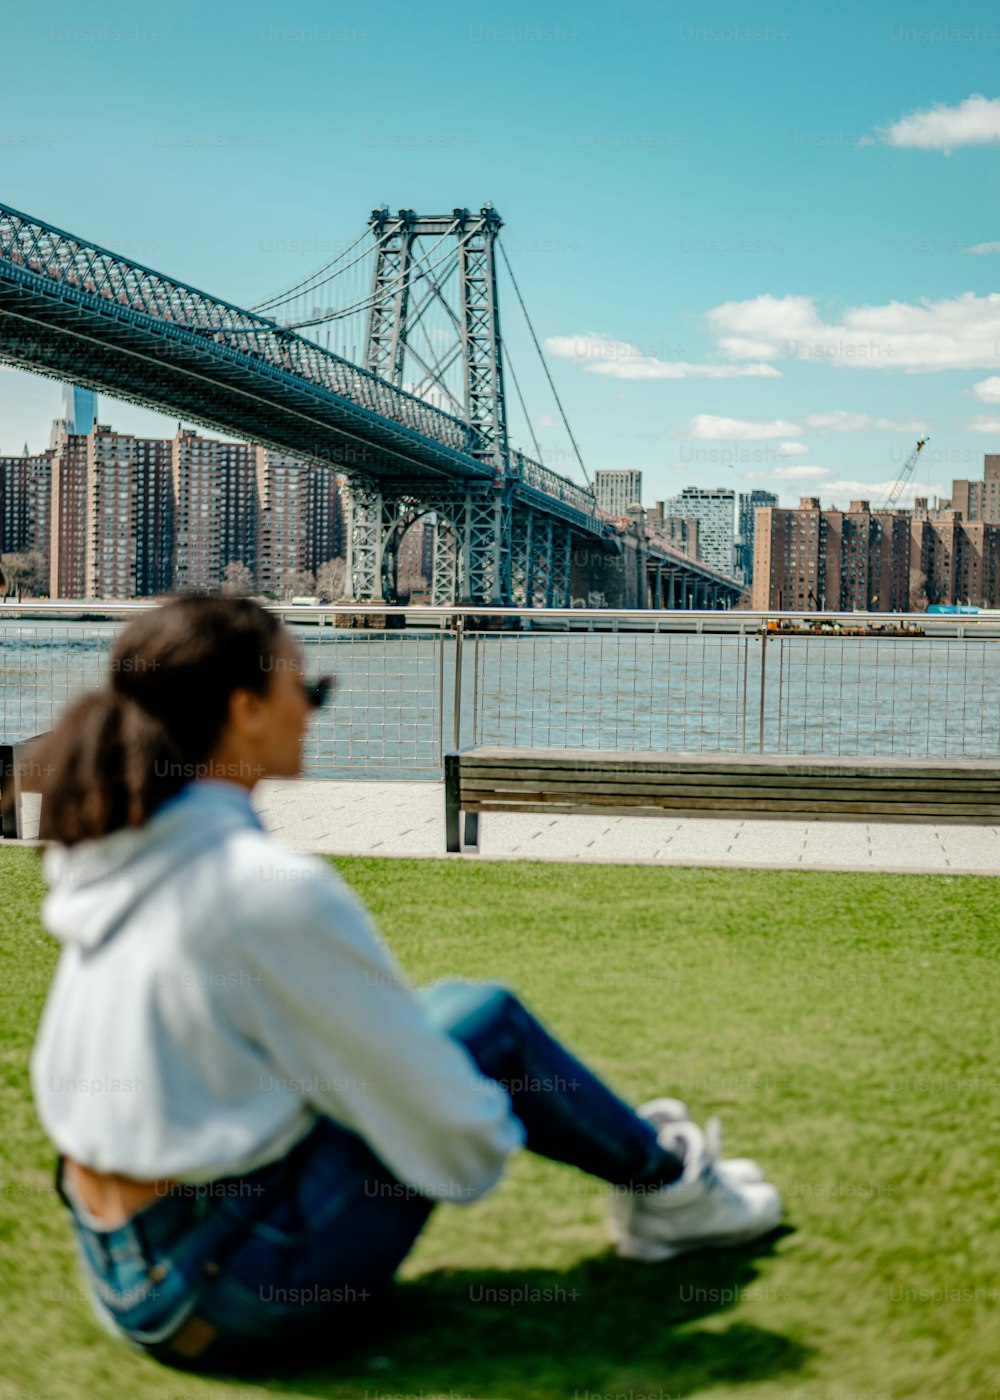 a woman sitting on the grass in front of a bridge